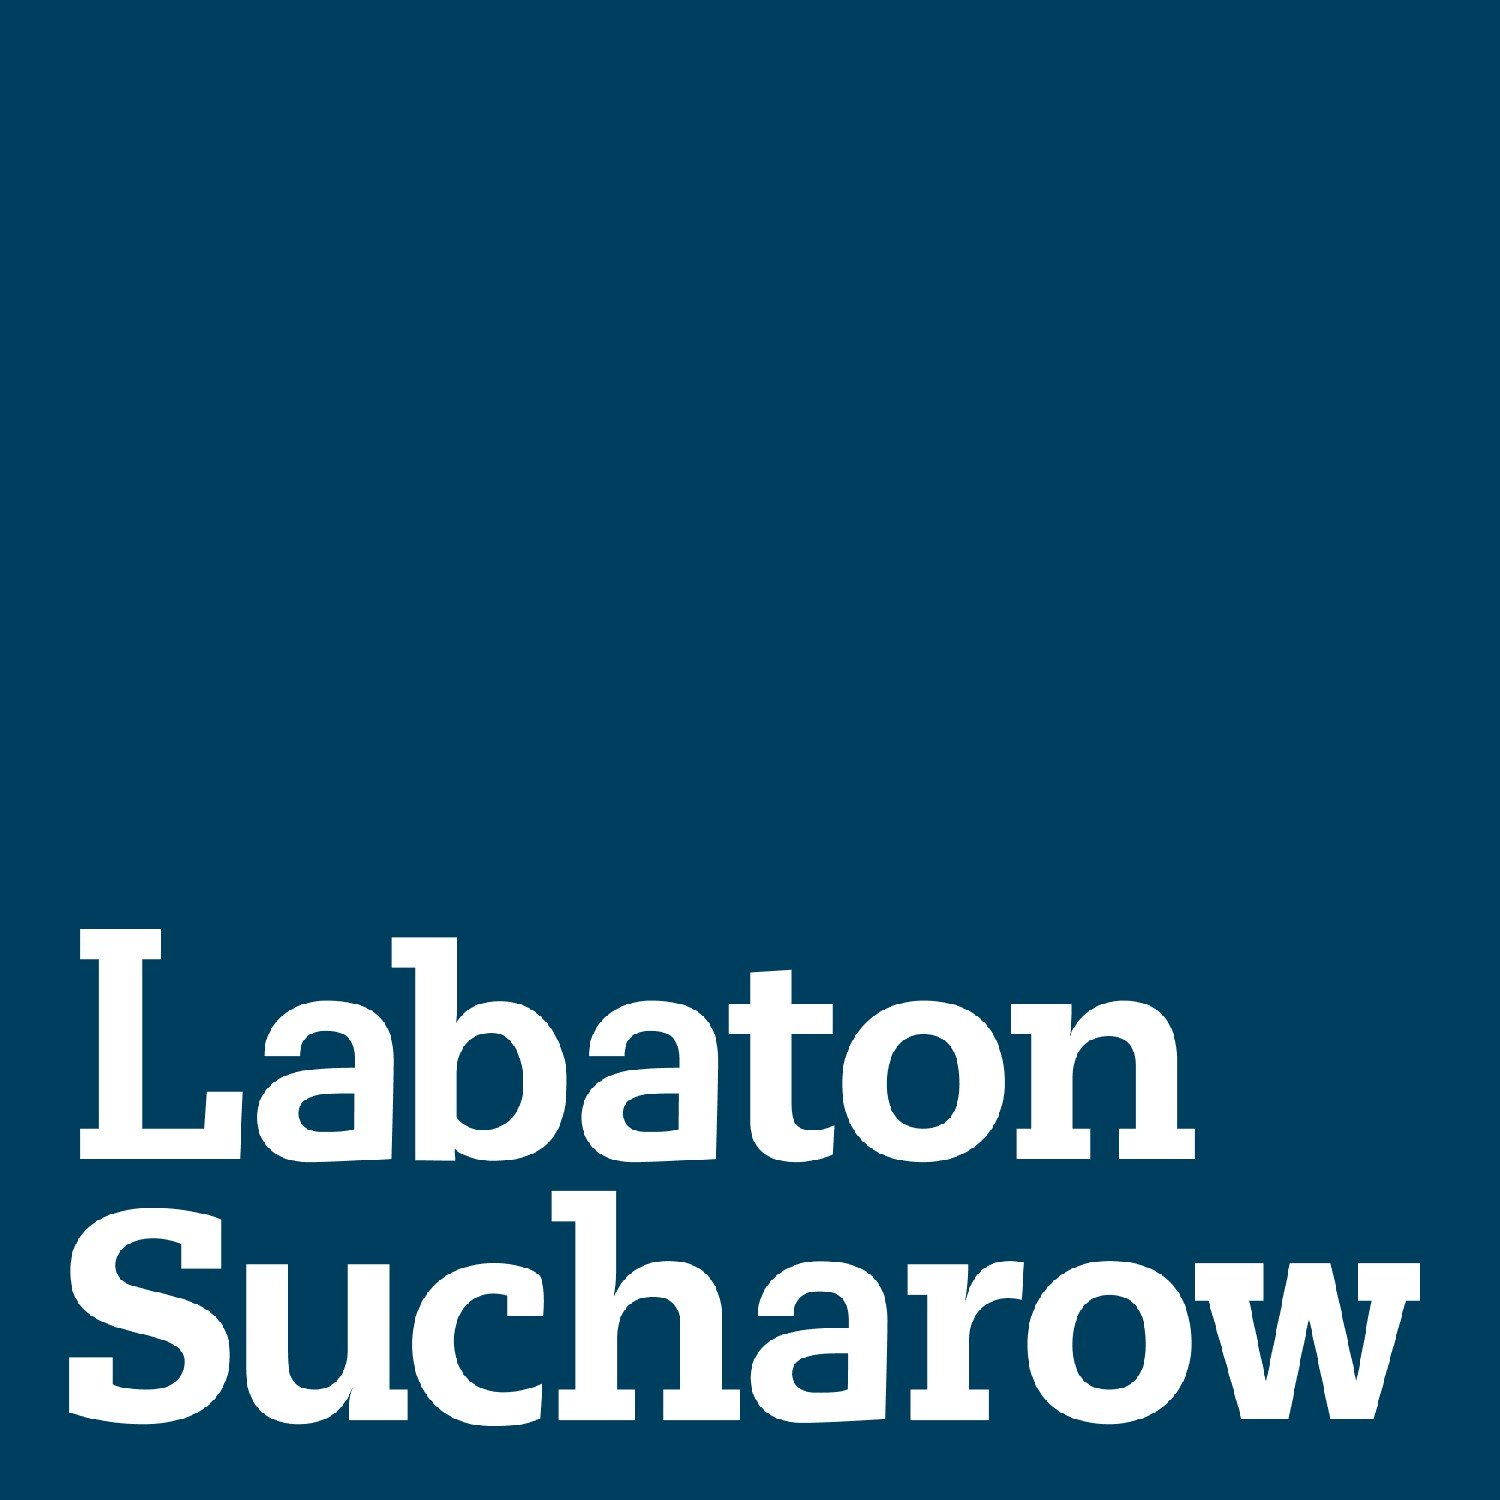 Labaton Sucharow LLP, Thursday, May 7, 2020, Press release picture